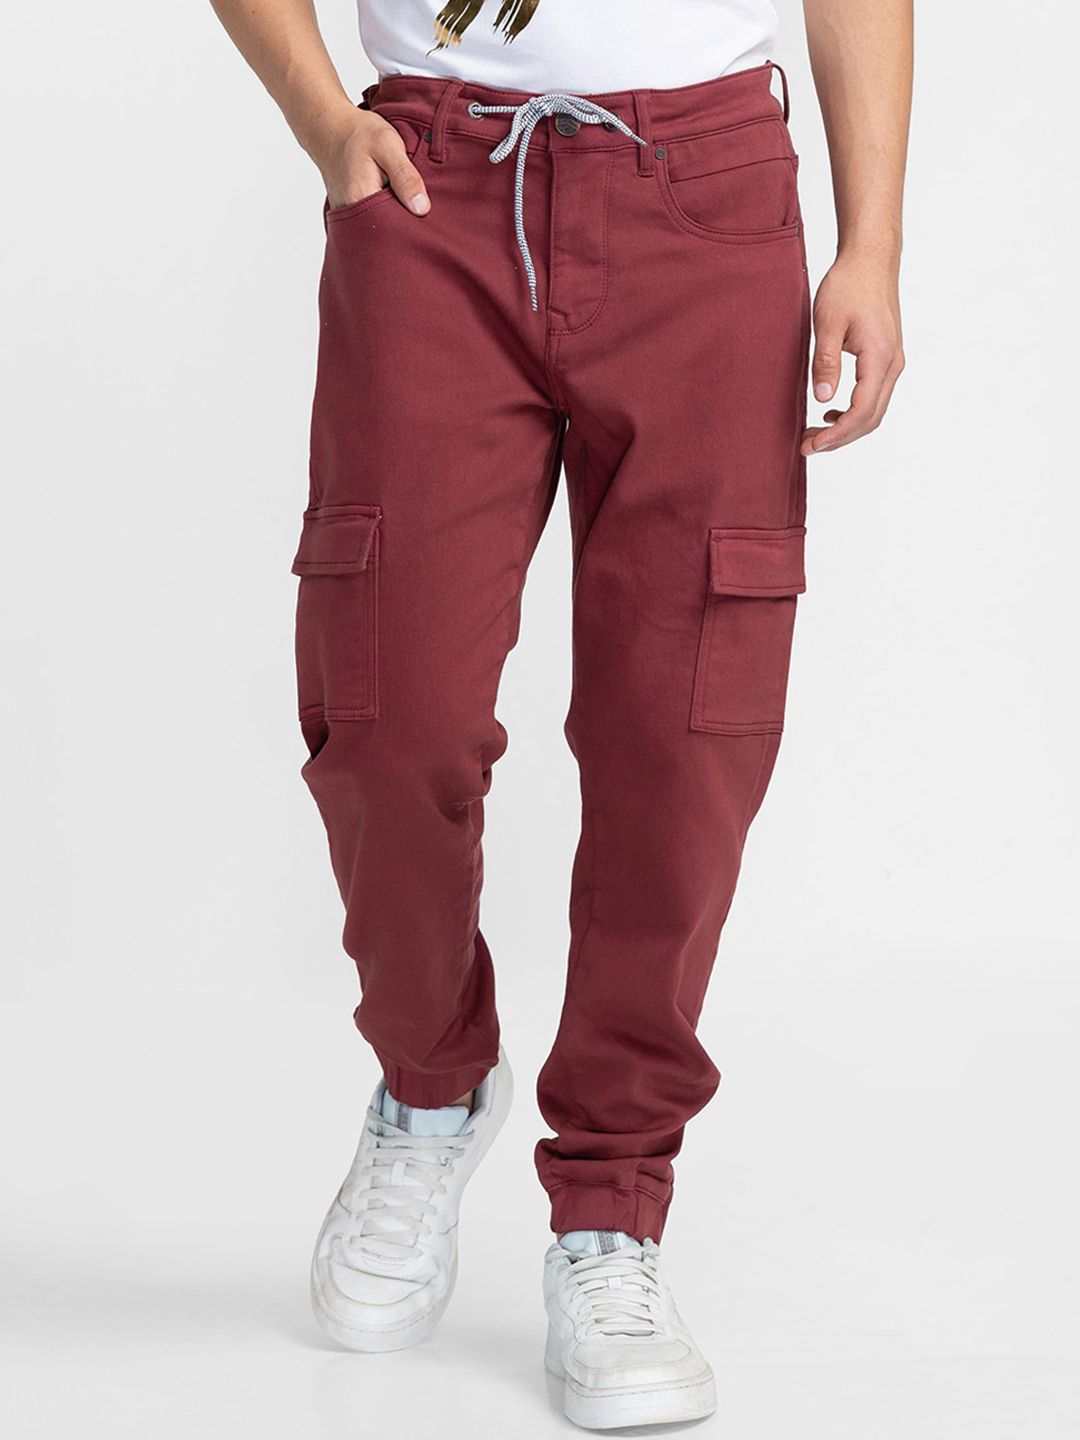 Buy Being Human Being Human Olive Mid Rise Joggers at Redfynd